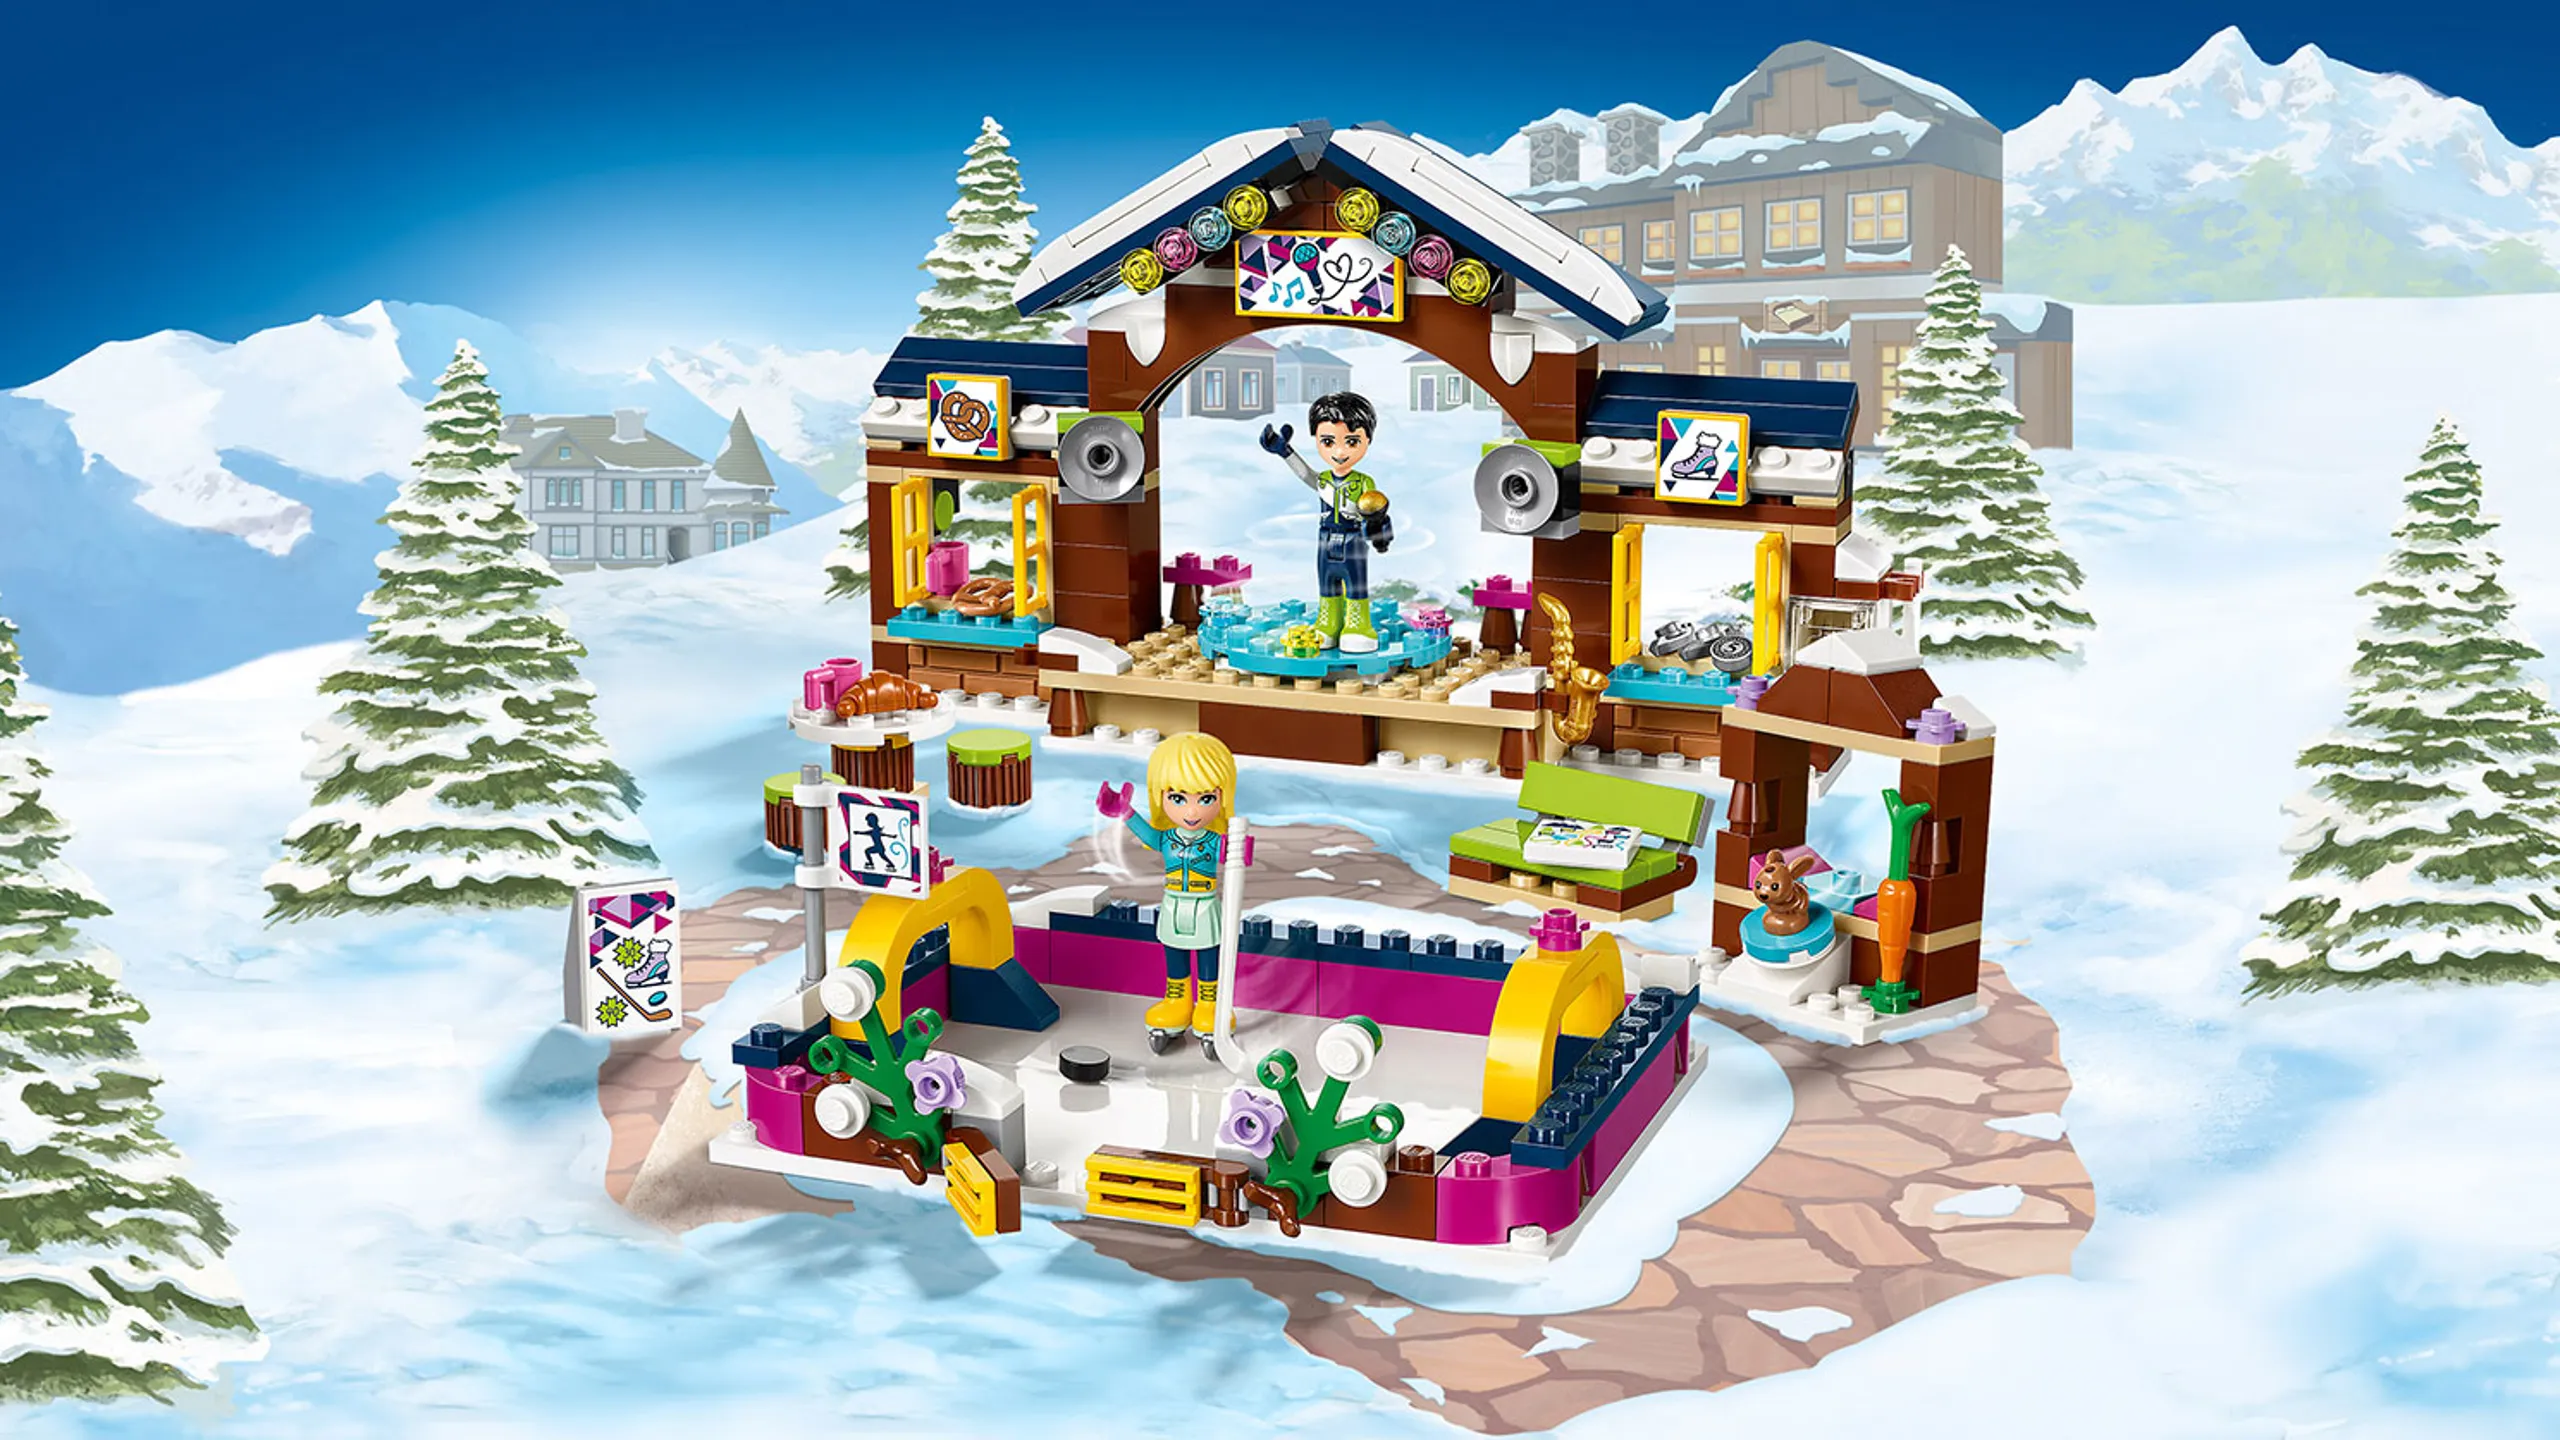 LEGO Friends - 41322 Snow Resort Ice Rink - Nate sings on the stage next to the ice rink where Stephanie practices ice hockey. 